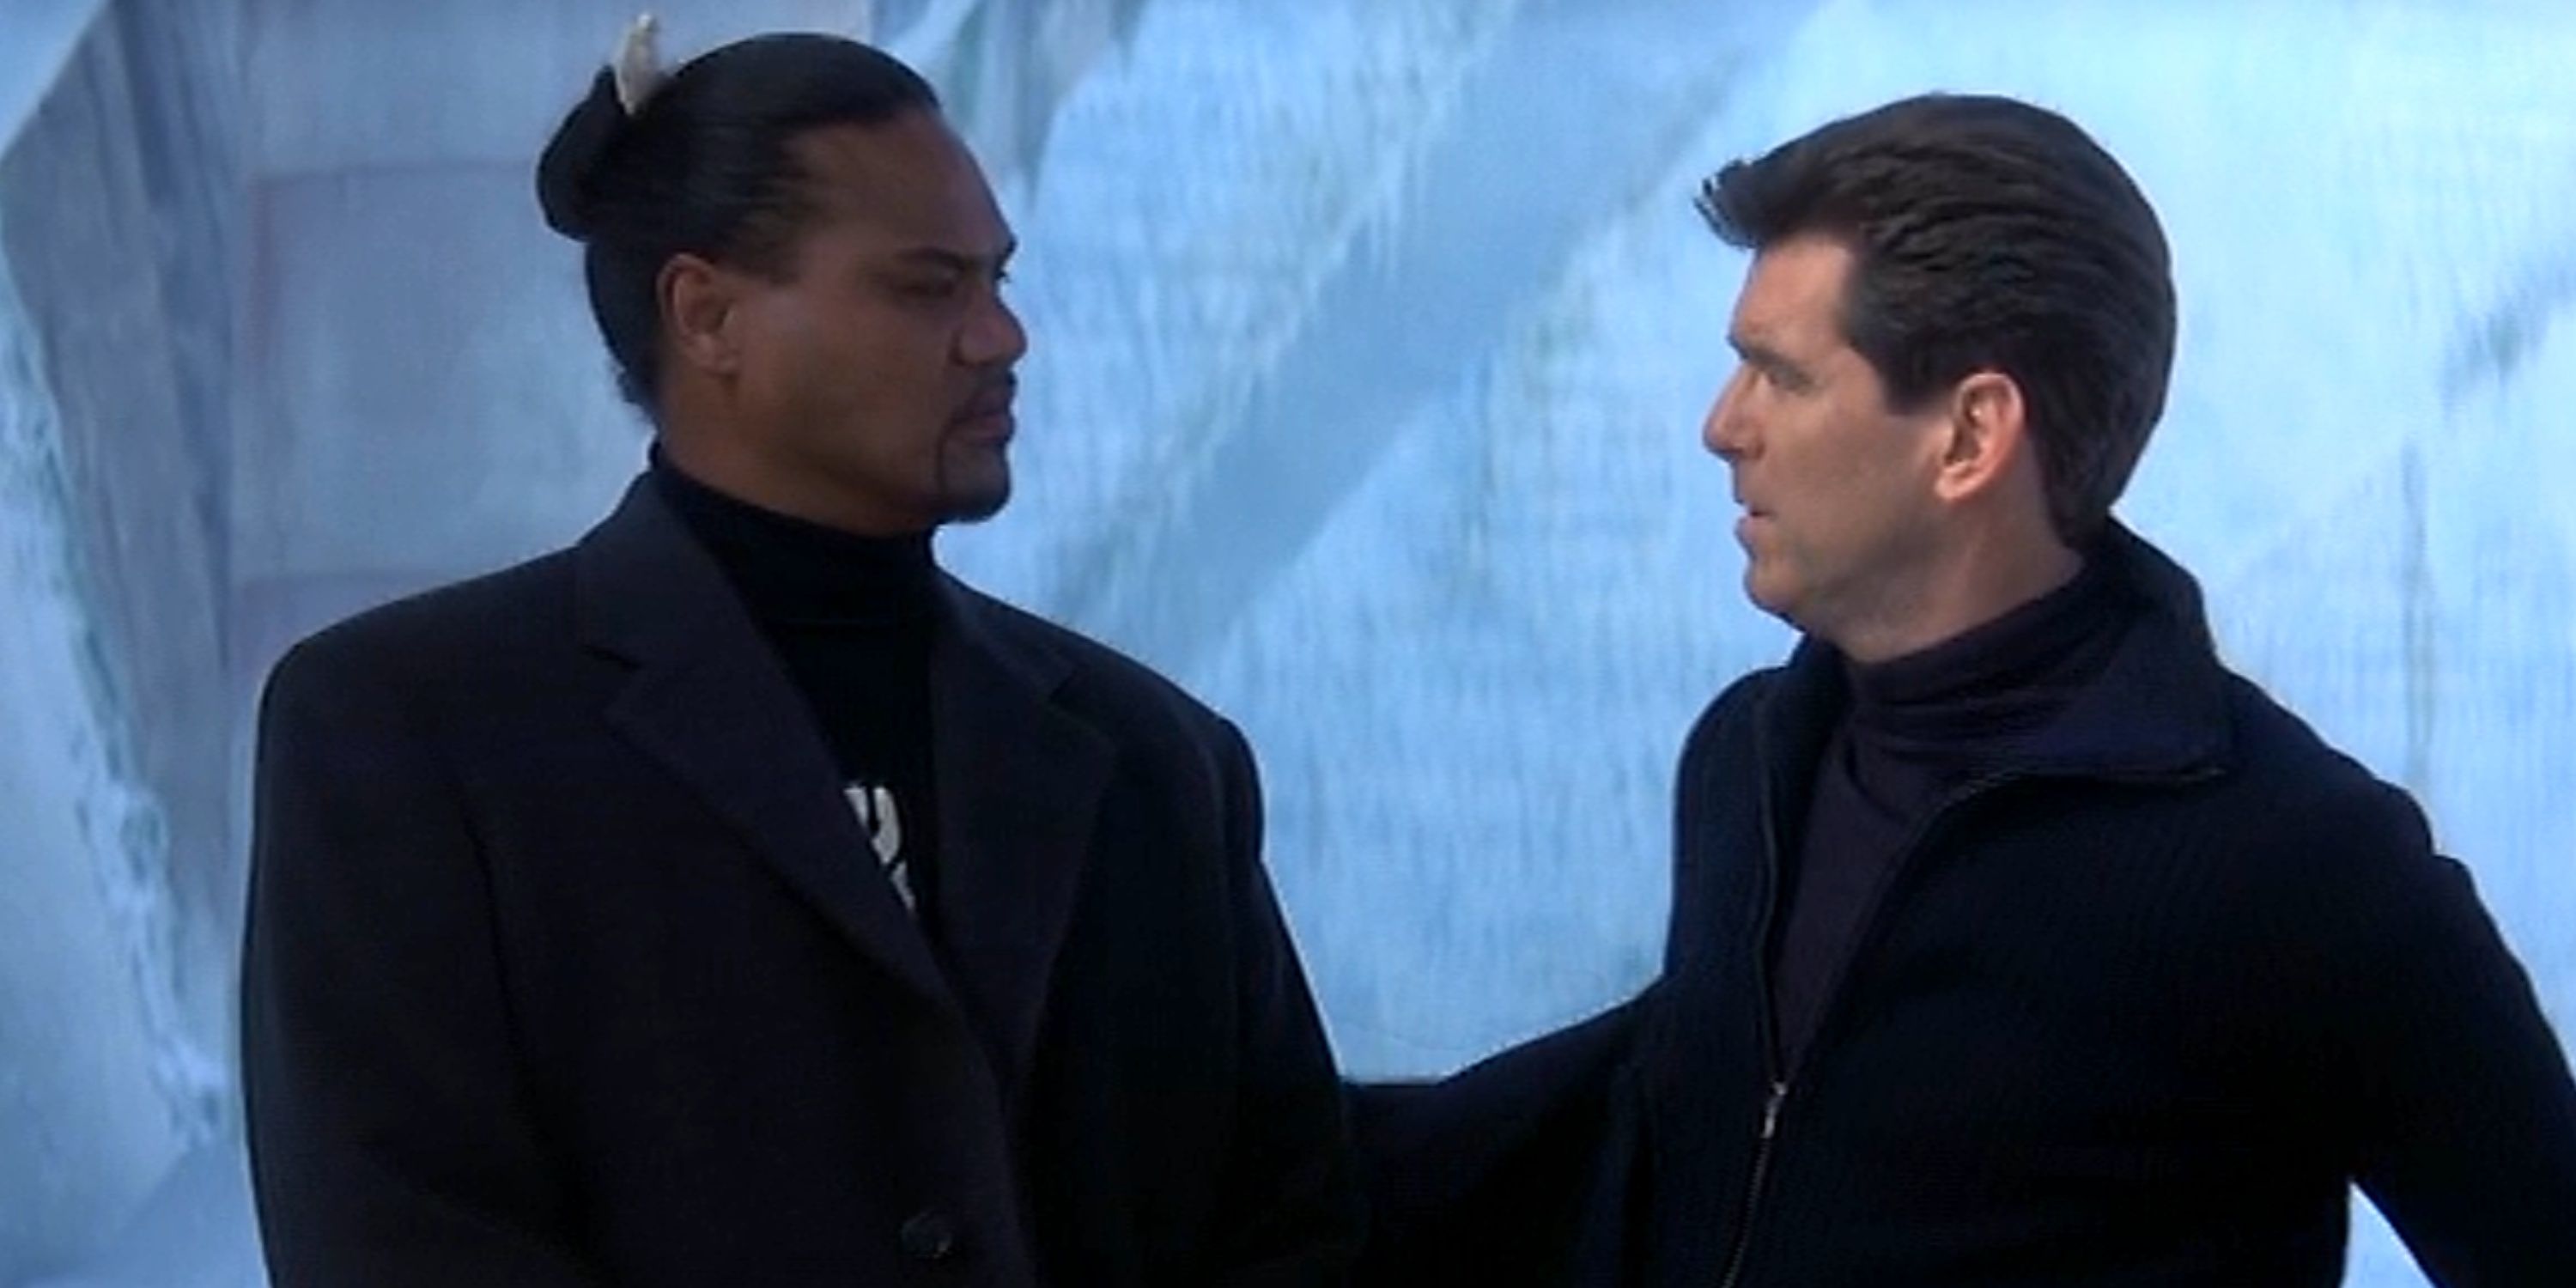 James Bond meets Mr. Kil in Die Another Day